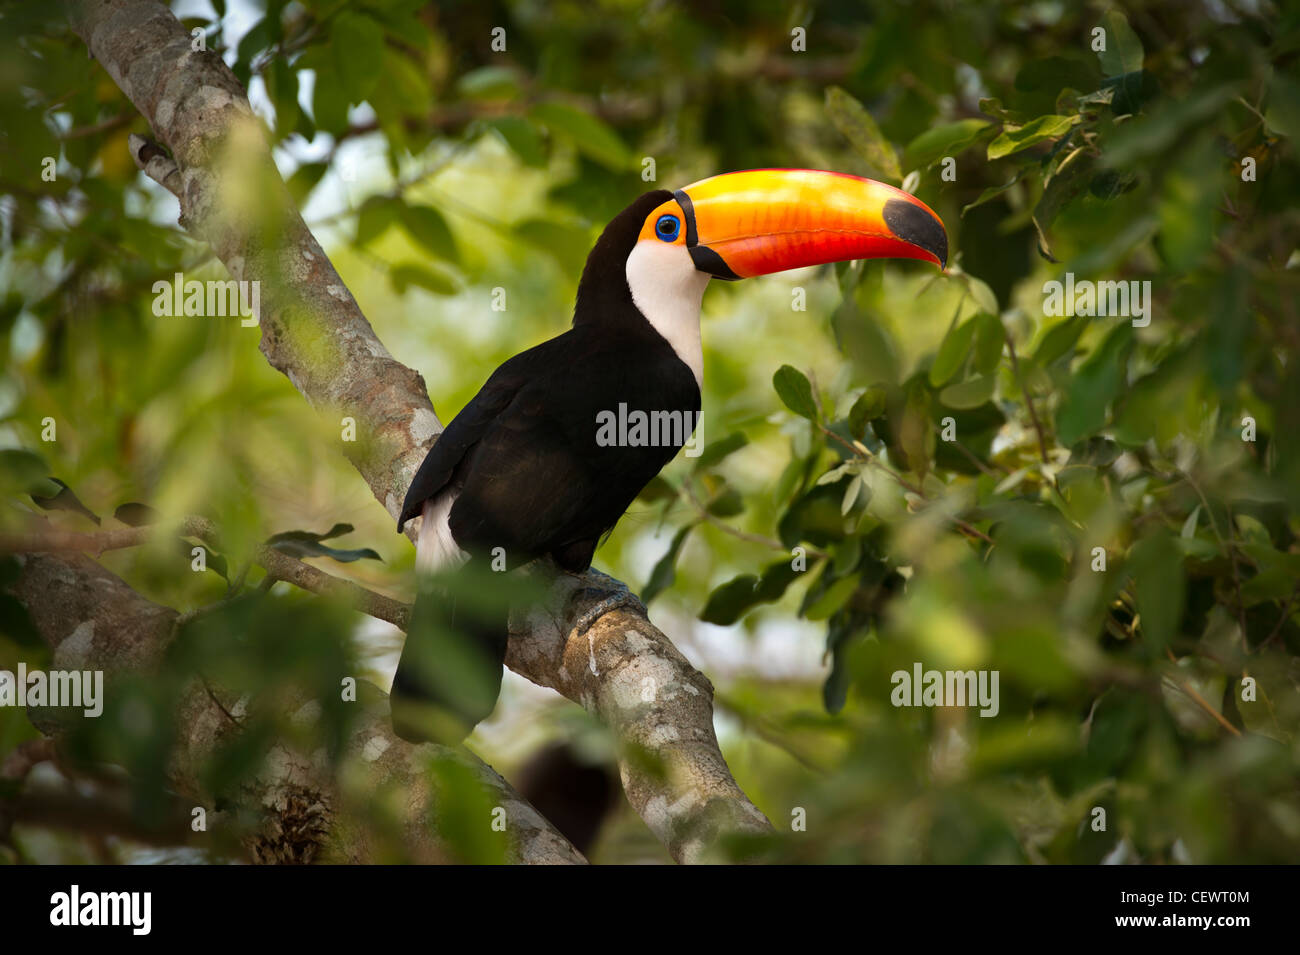 Toco Toucan (Ramphastos toco) in the forest canopy adjacent to the Piquiri River, northern Pantanal, Mato Grosso, Brazil. Stock Photo